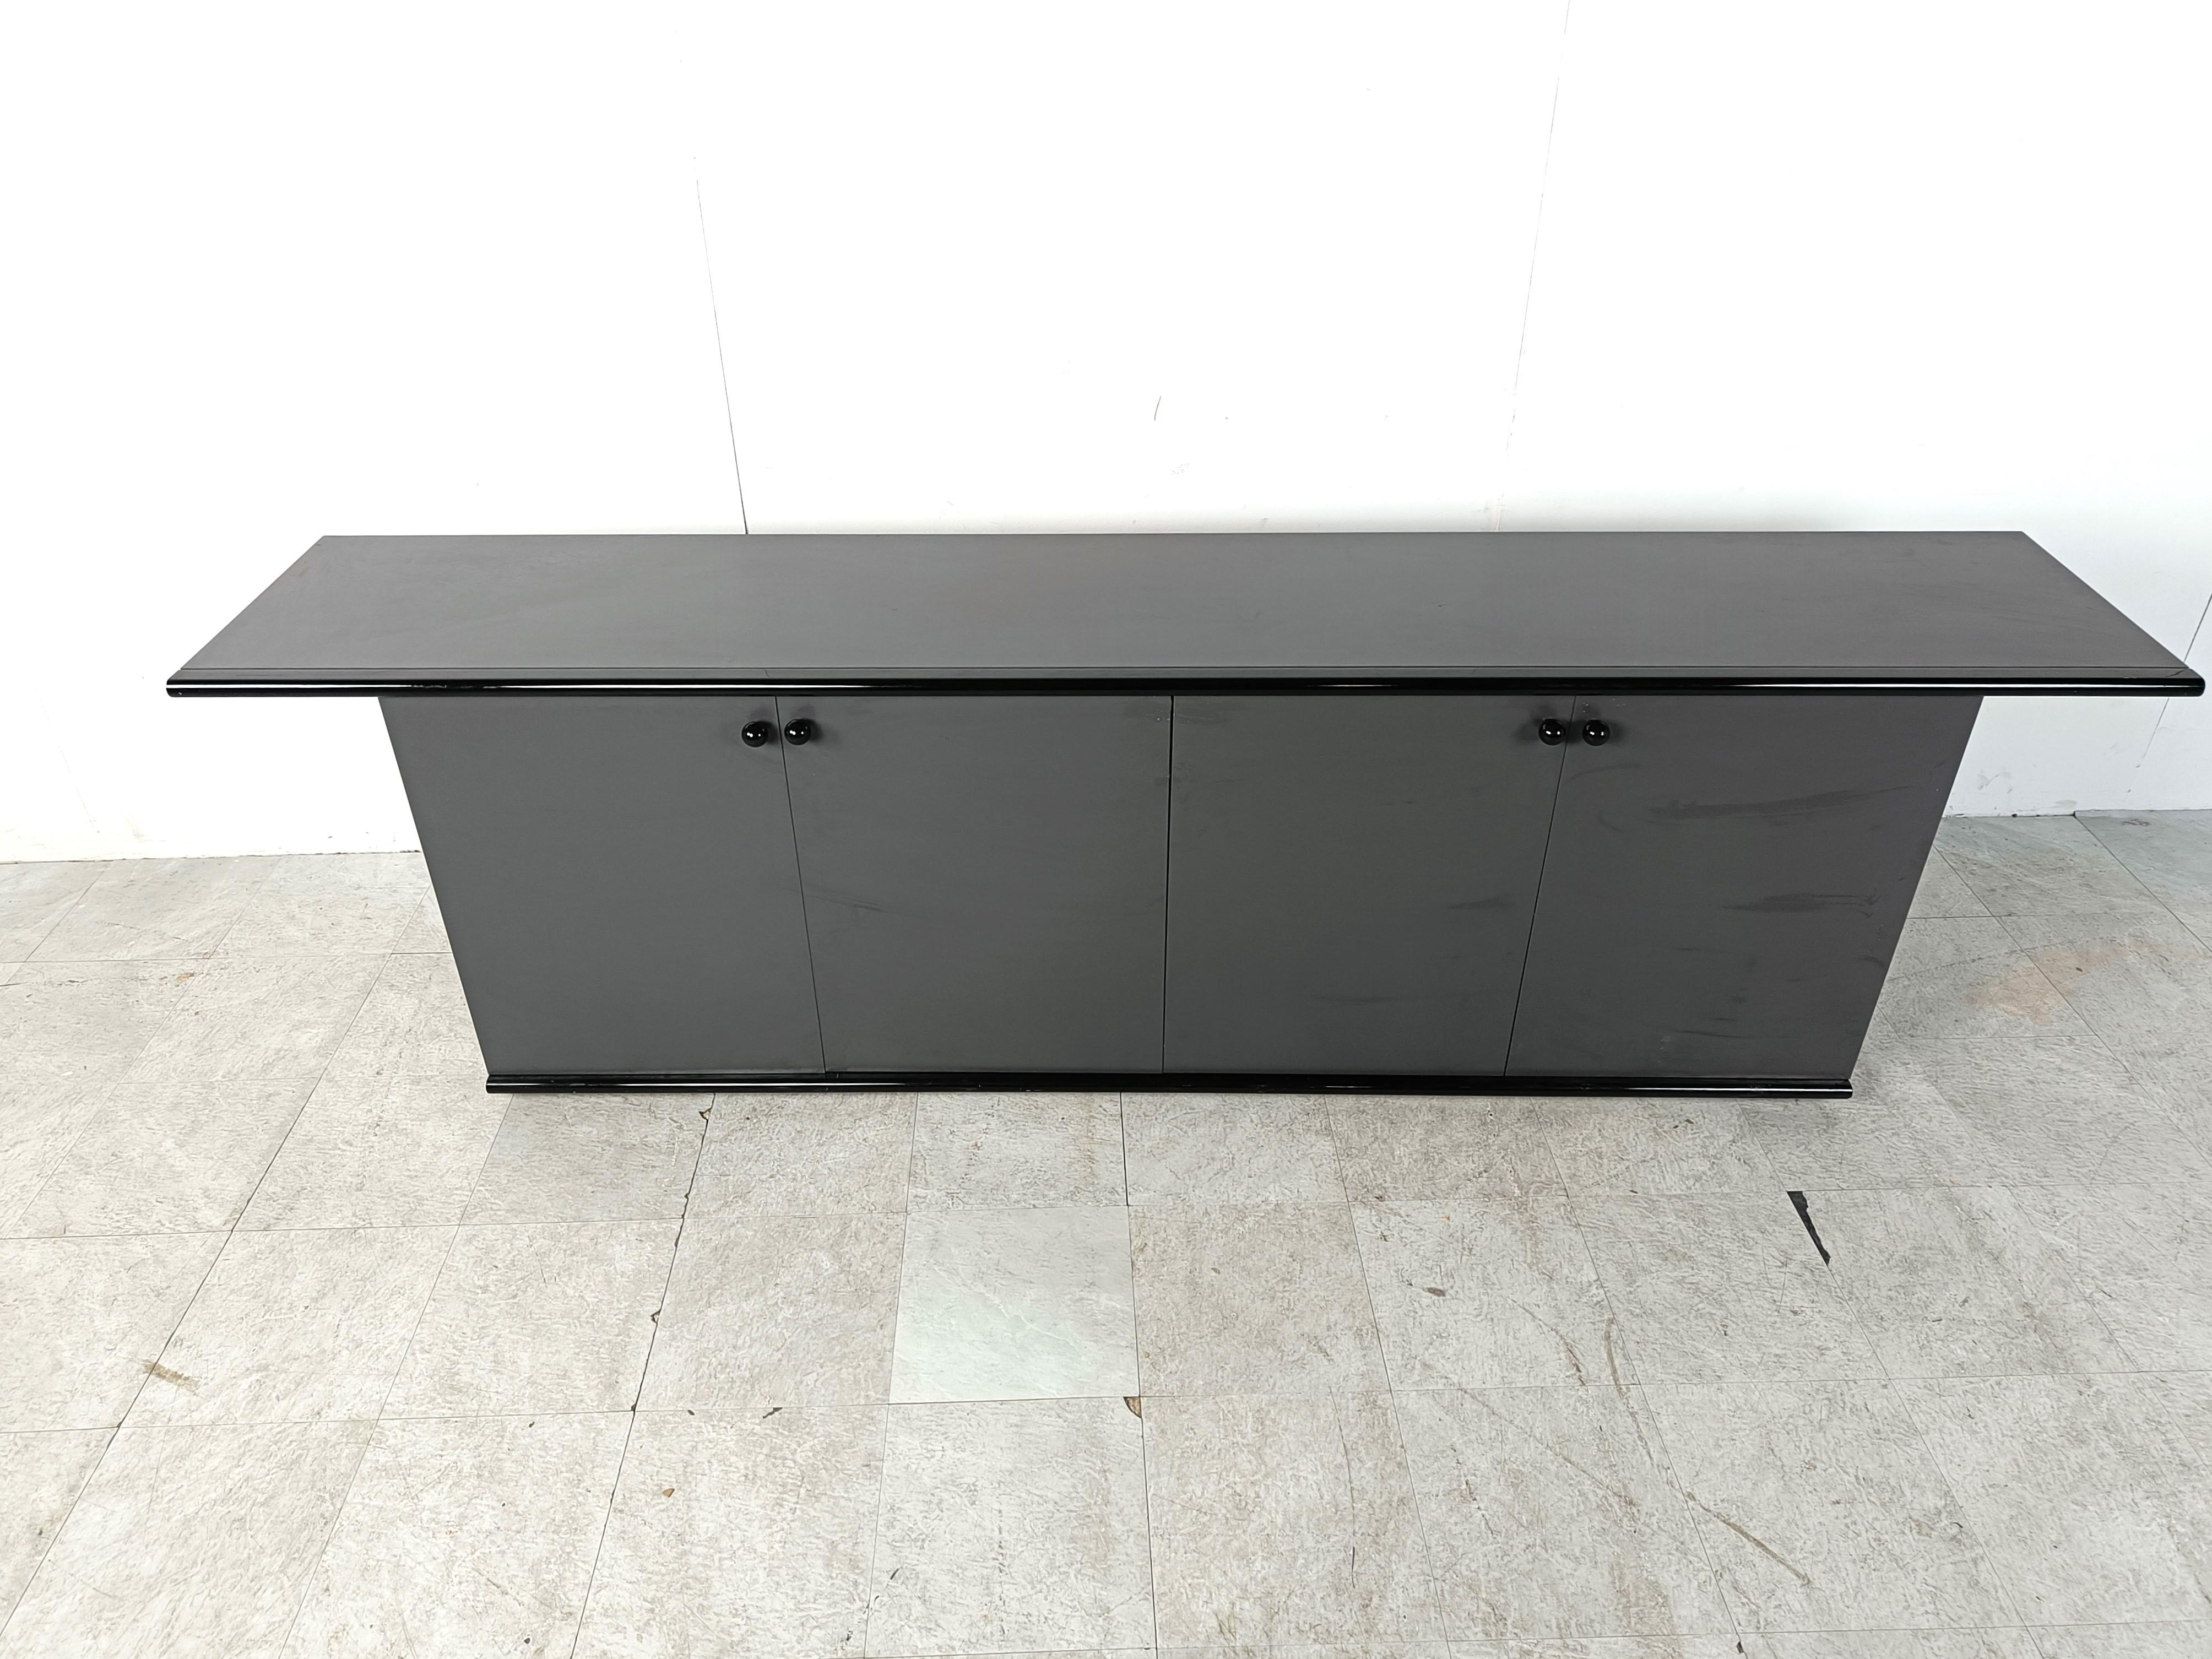 Vintage 1980s sideboard made from a grey wooden frame with black lacquered finish.

Typical 1980s style sideboard with an oversized top.

the 4 doors reveal plenty of storage space.

1980s - Belgium

Good condition

Dimensions:
Lenght: